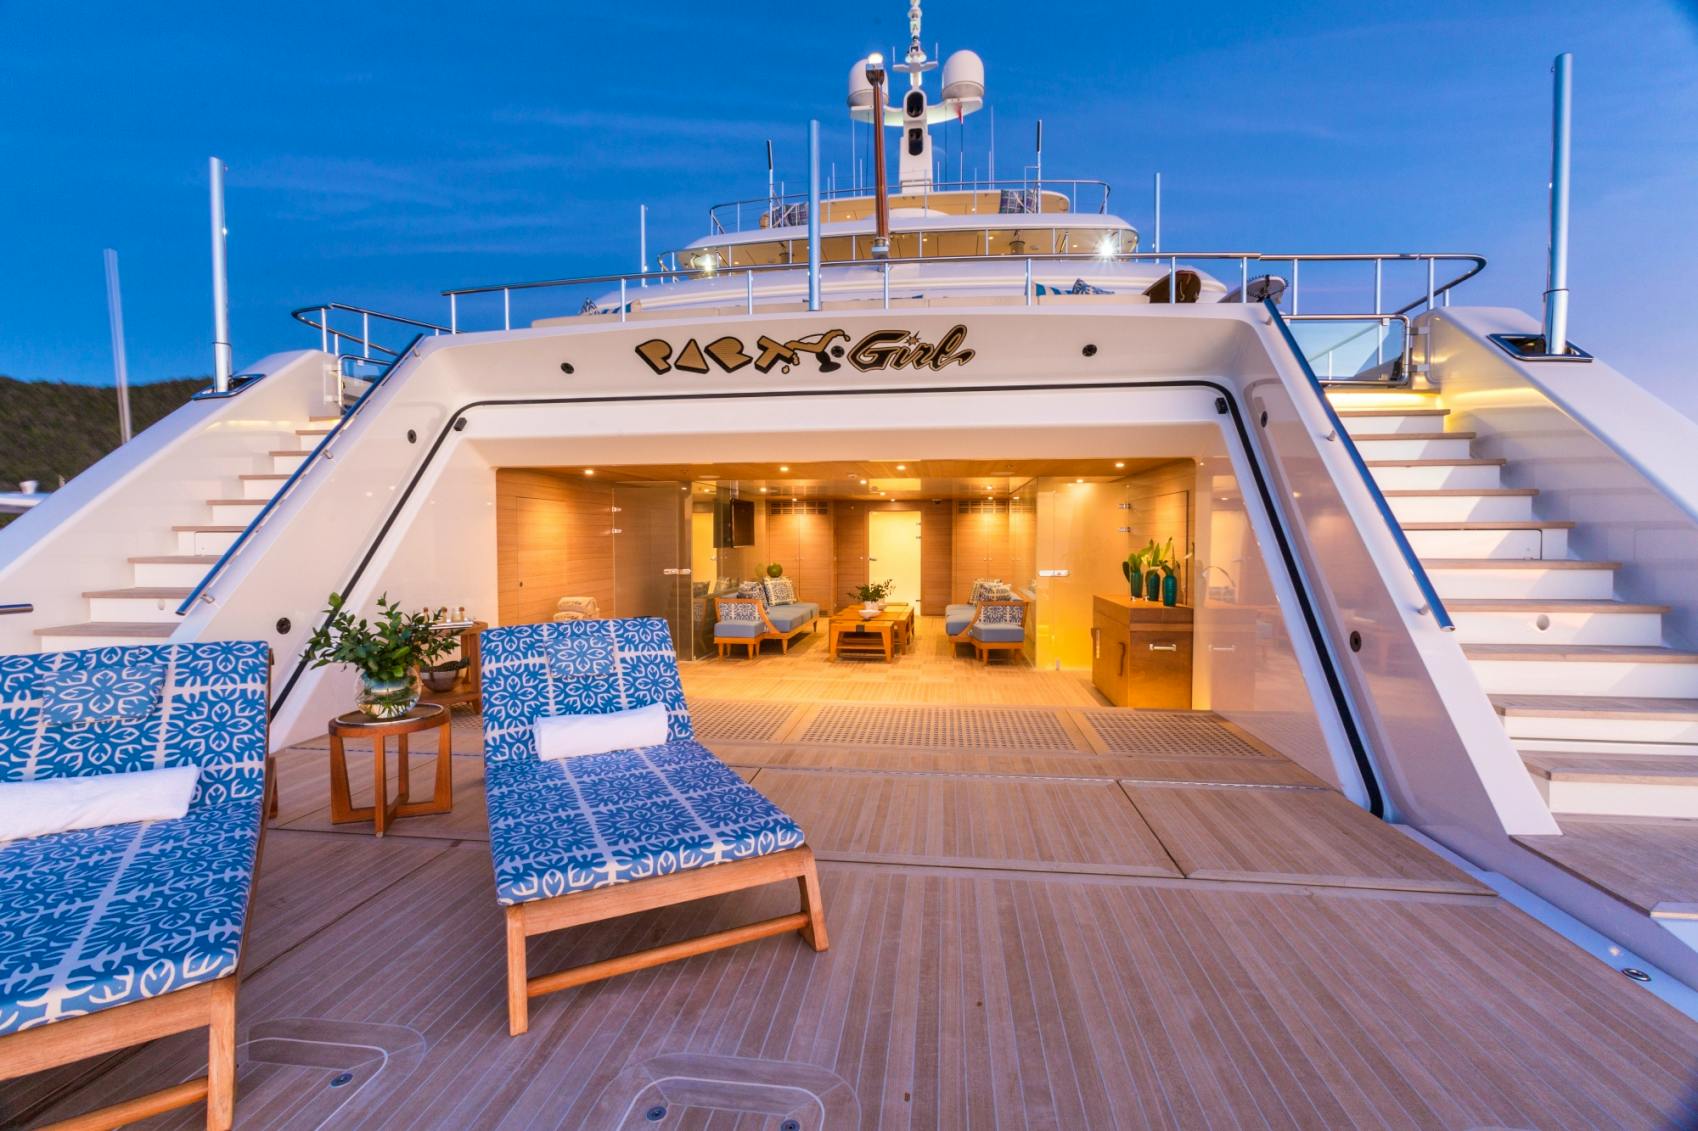 party girl yacht charter